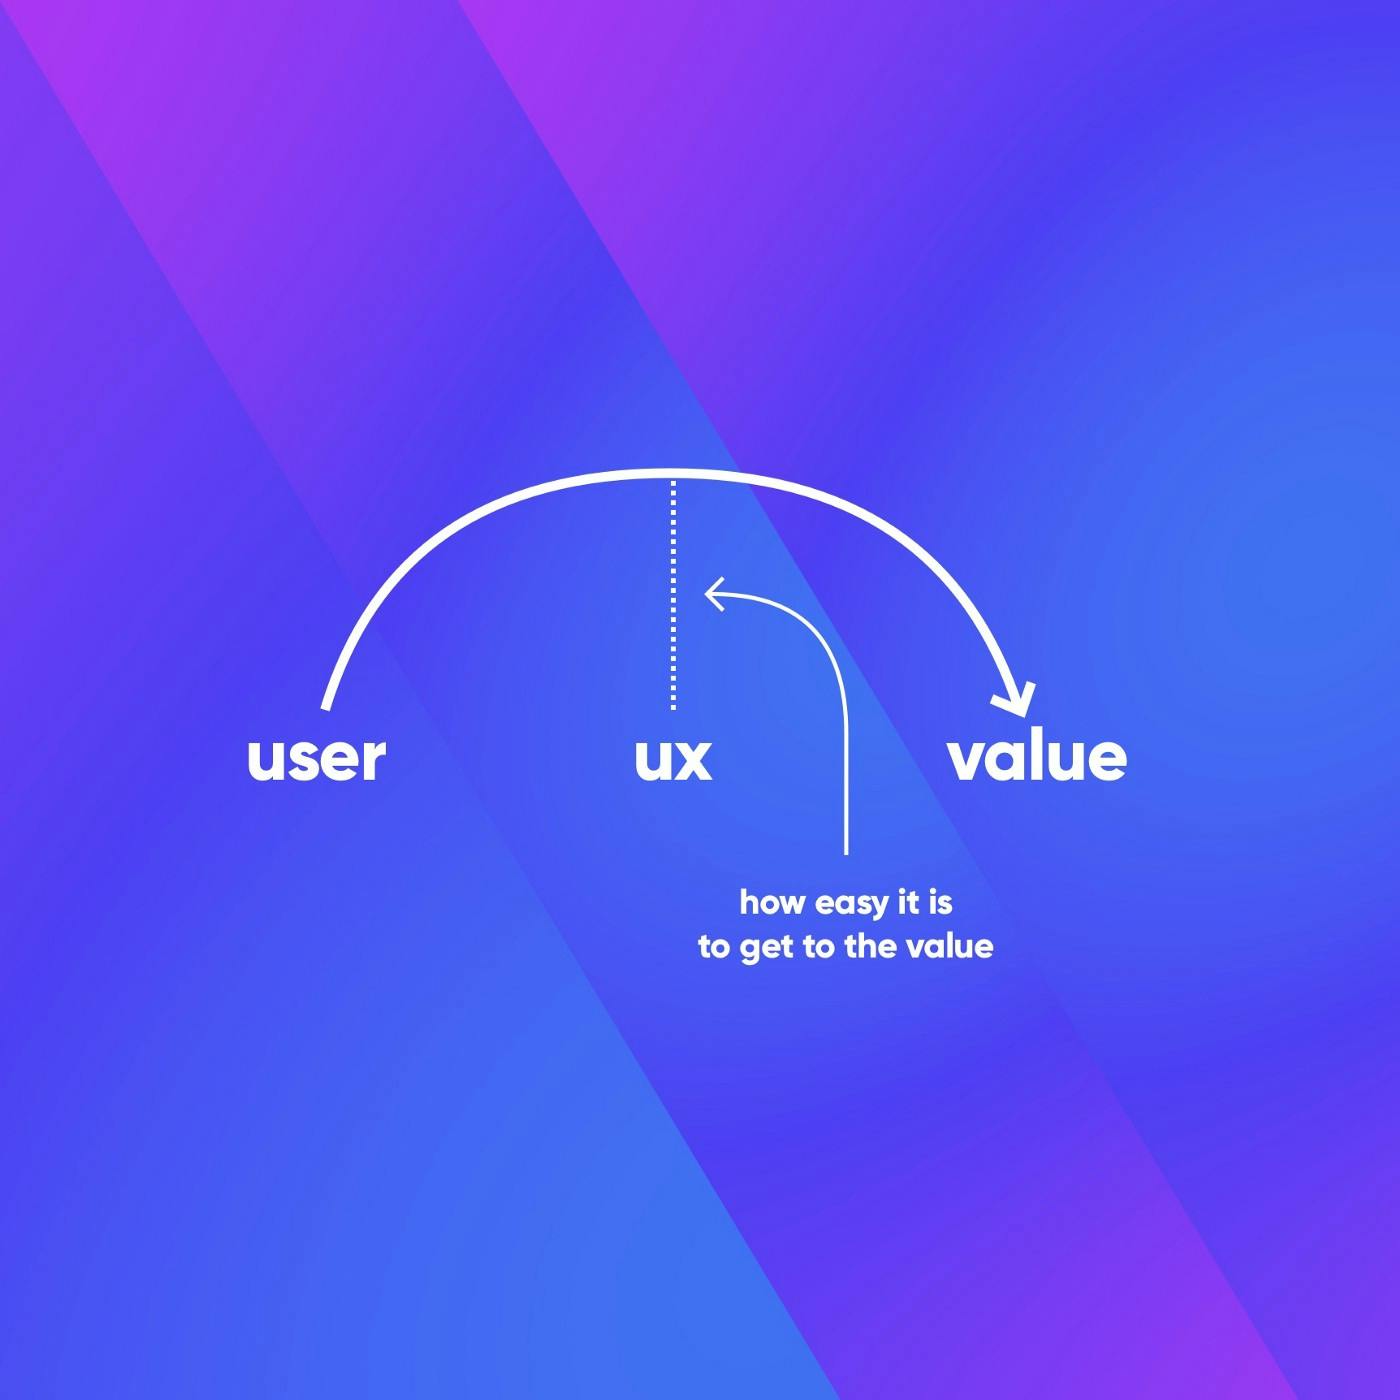 ux is overrated